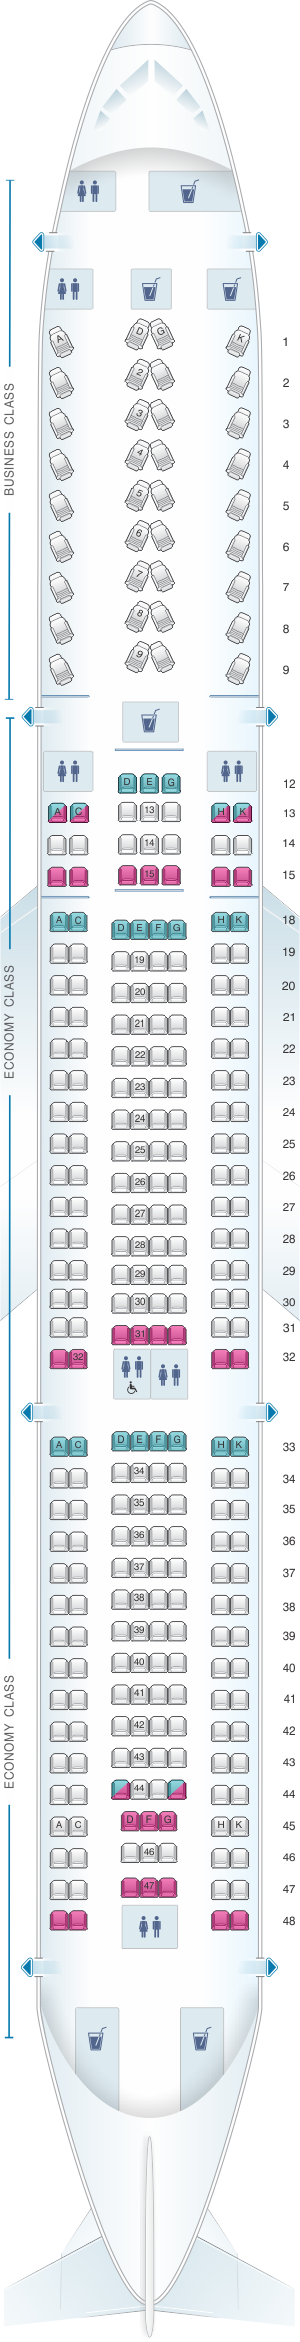 Seat map for Air Canada Airbus A330 300 config.2